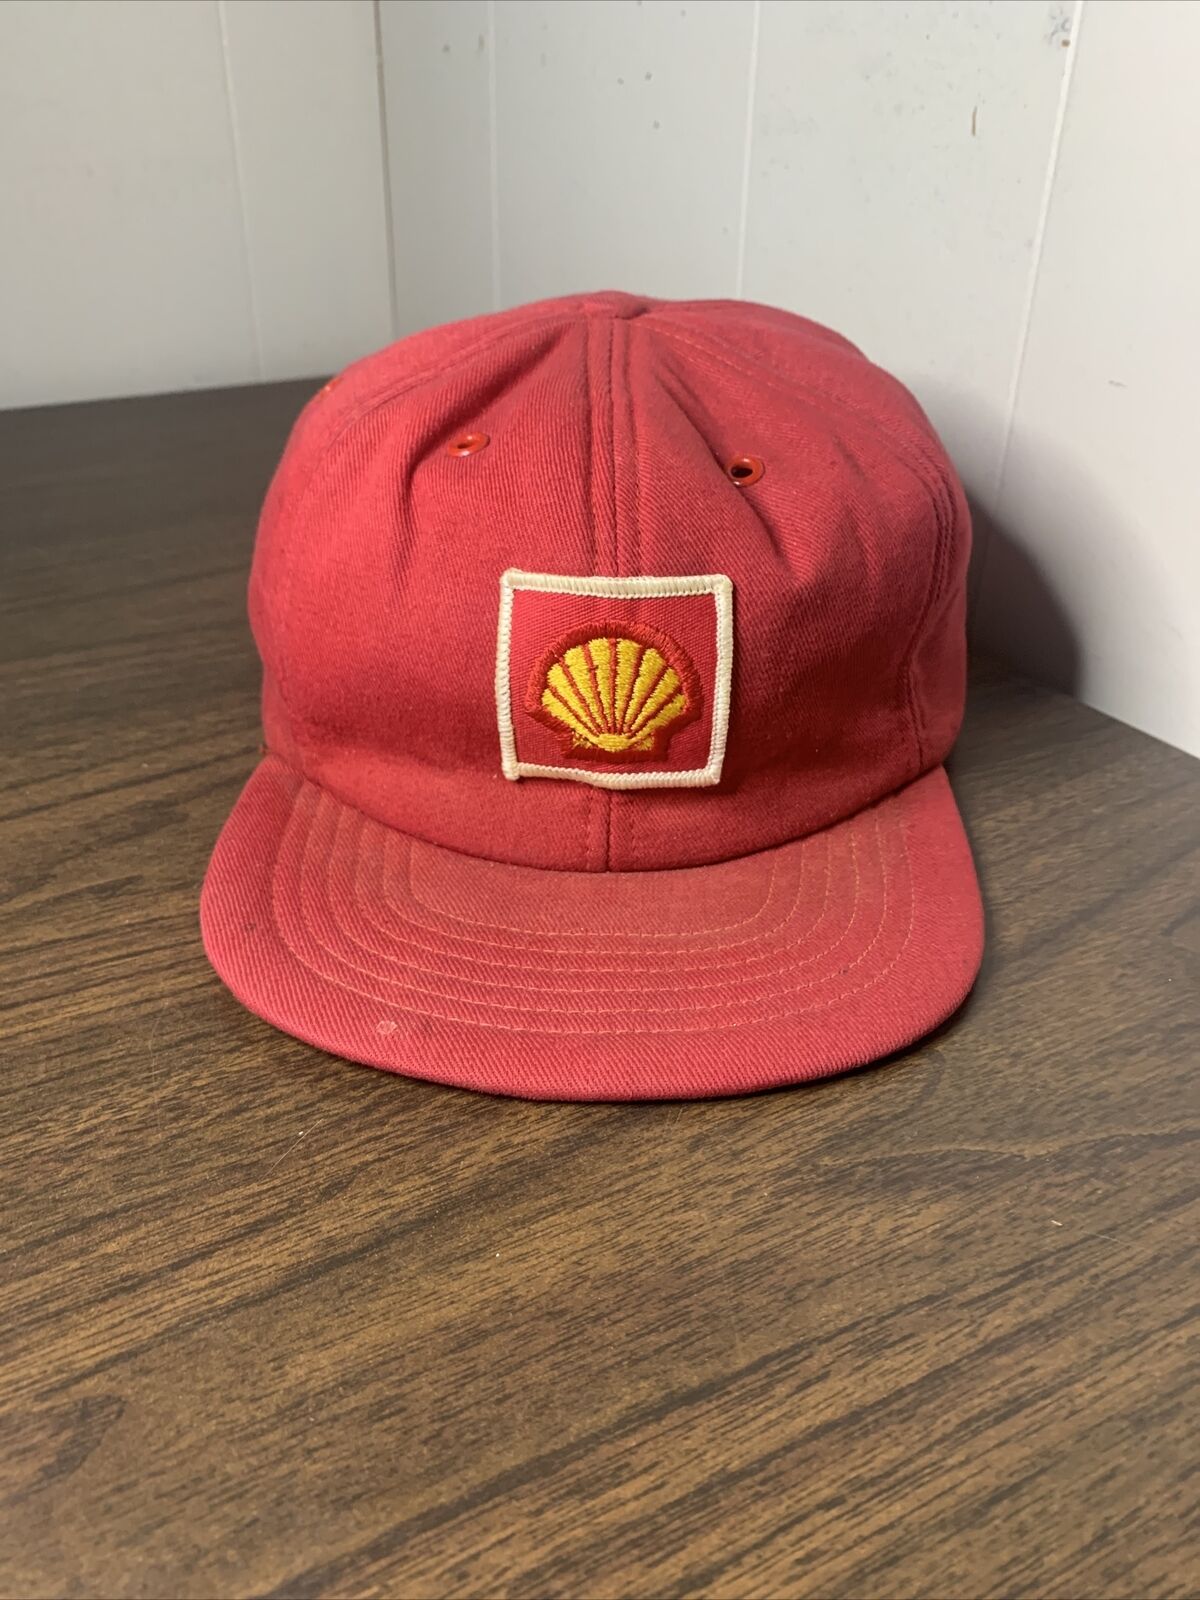 Vintage Shell Oil Hat Red SnapBack Oil Gas - image 1